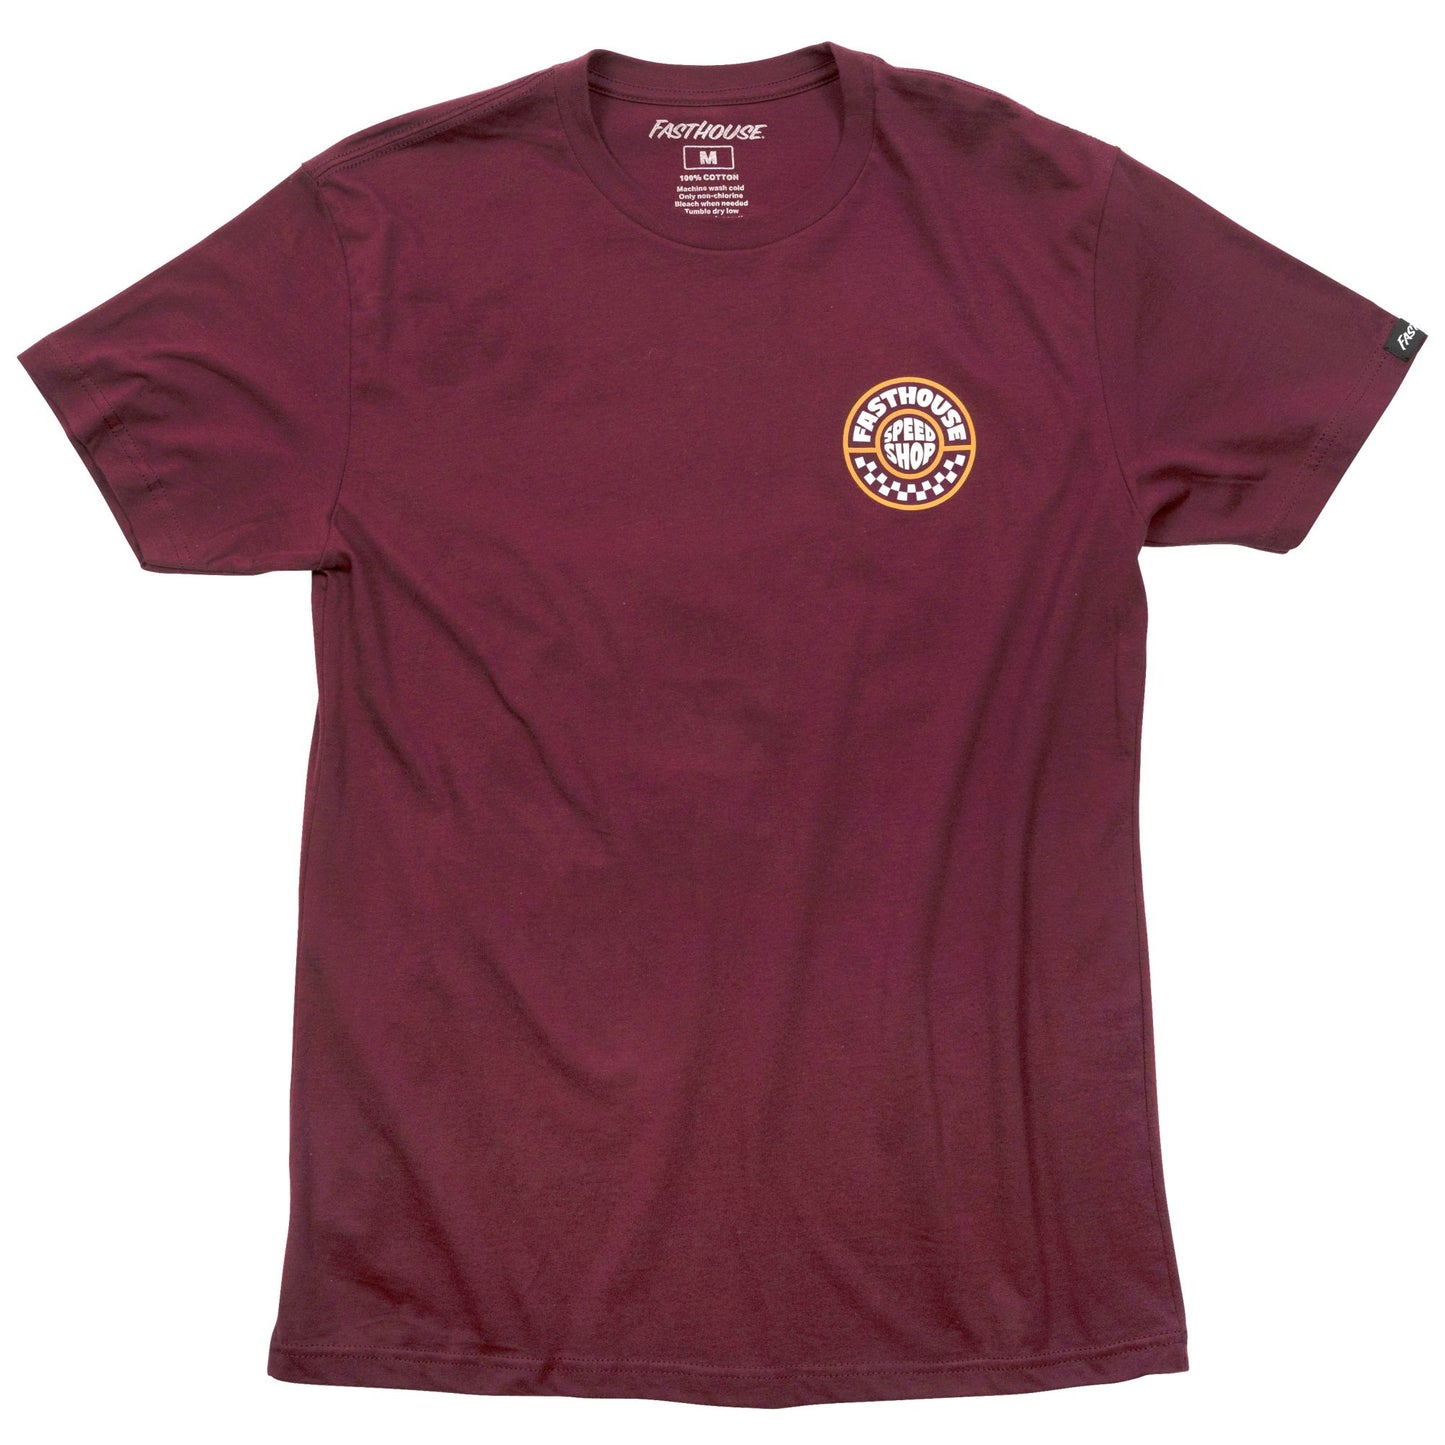 Fasthouse Realm SS Tee Maroon SS Shirts